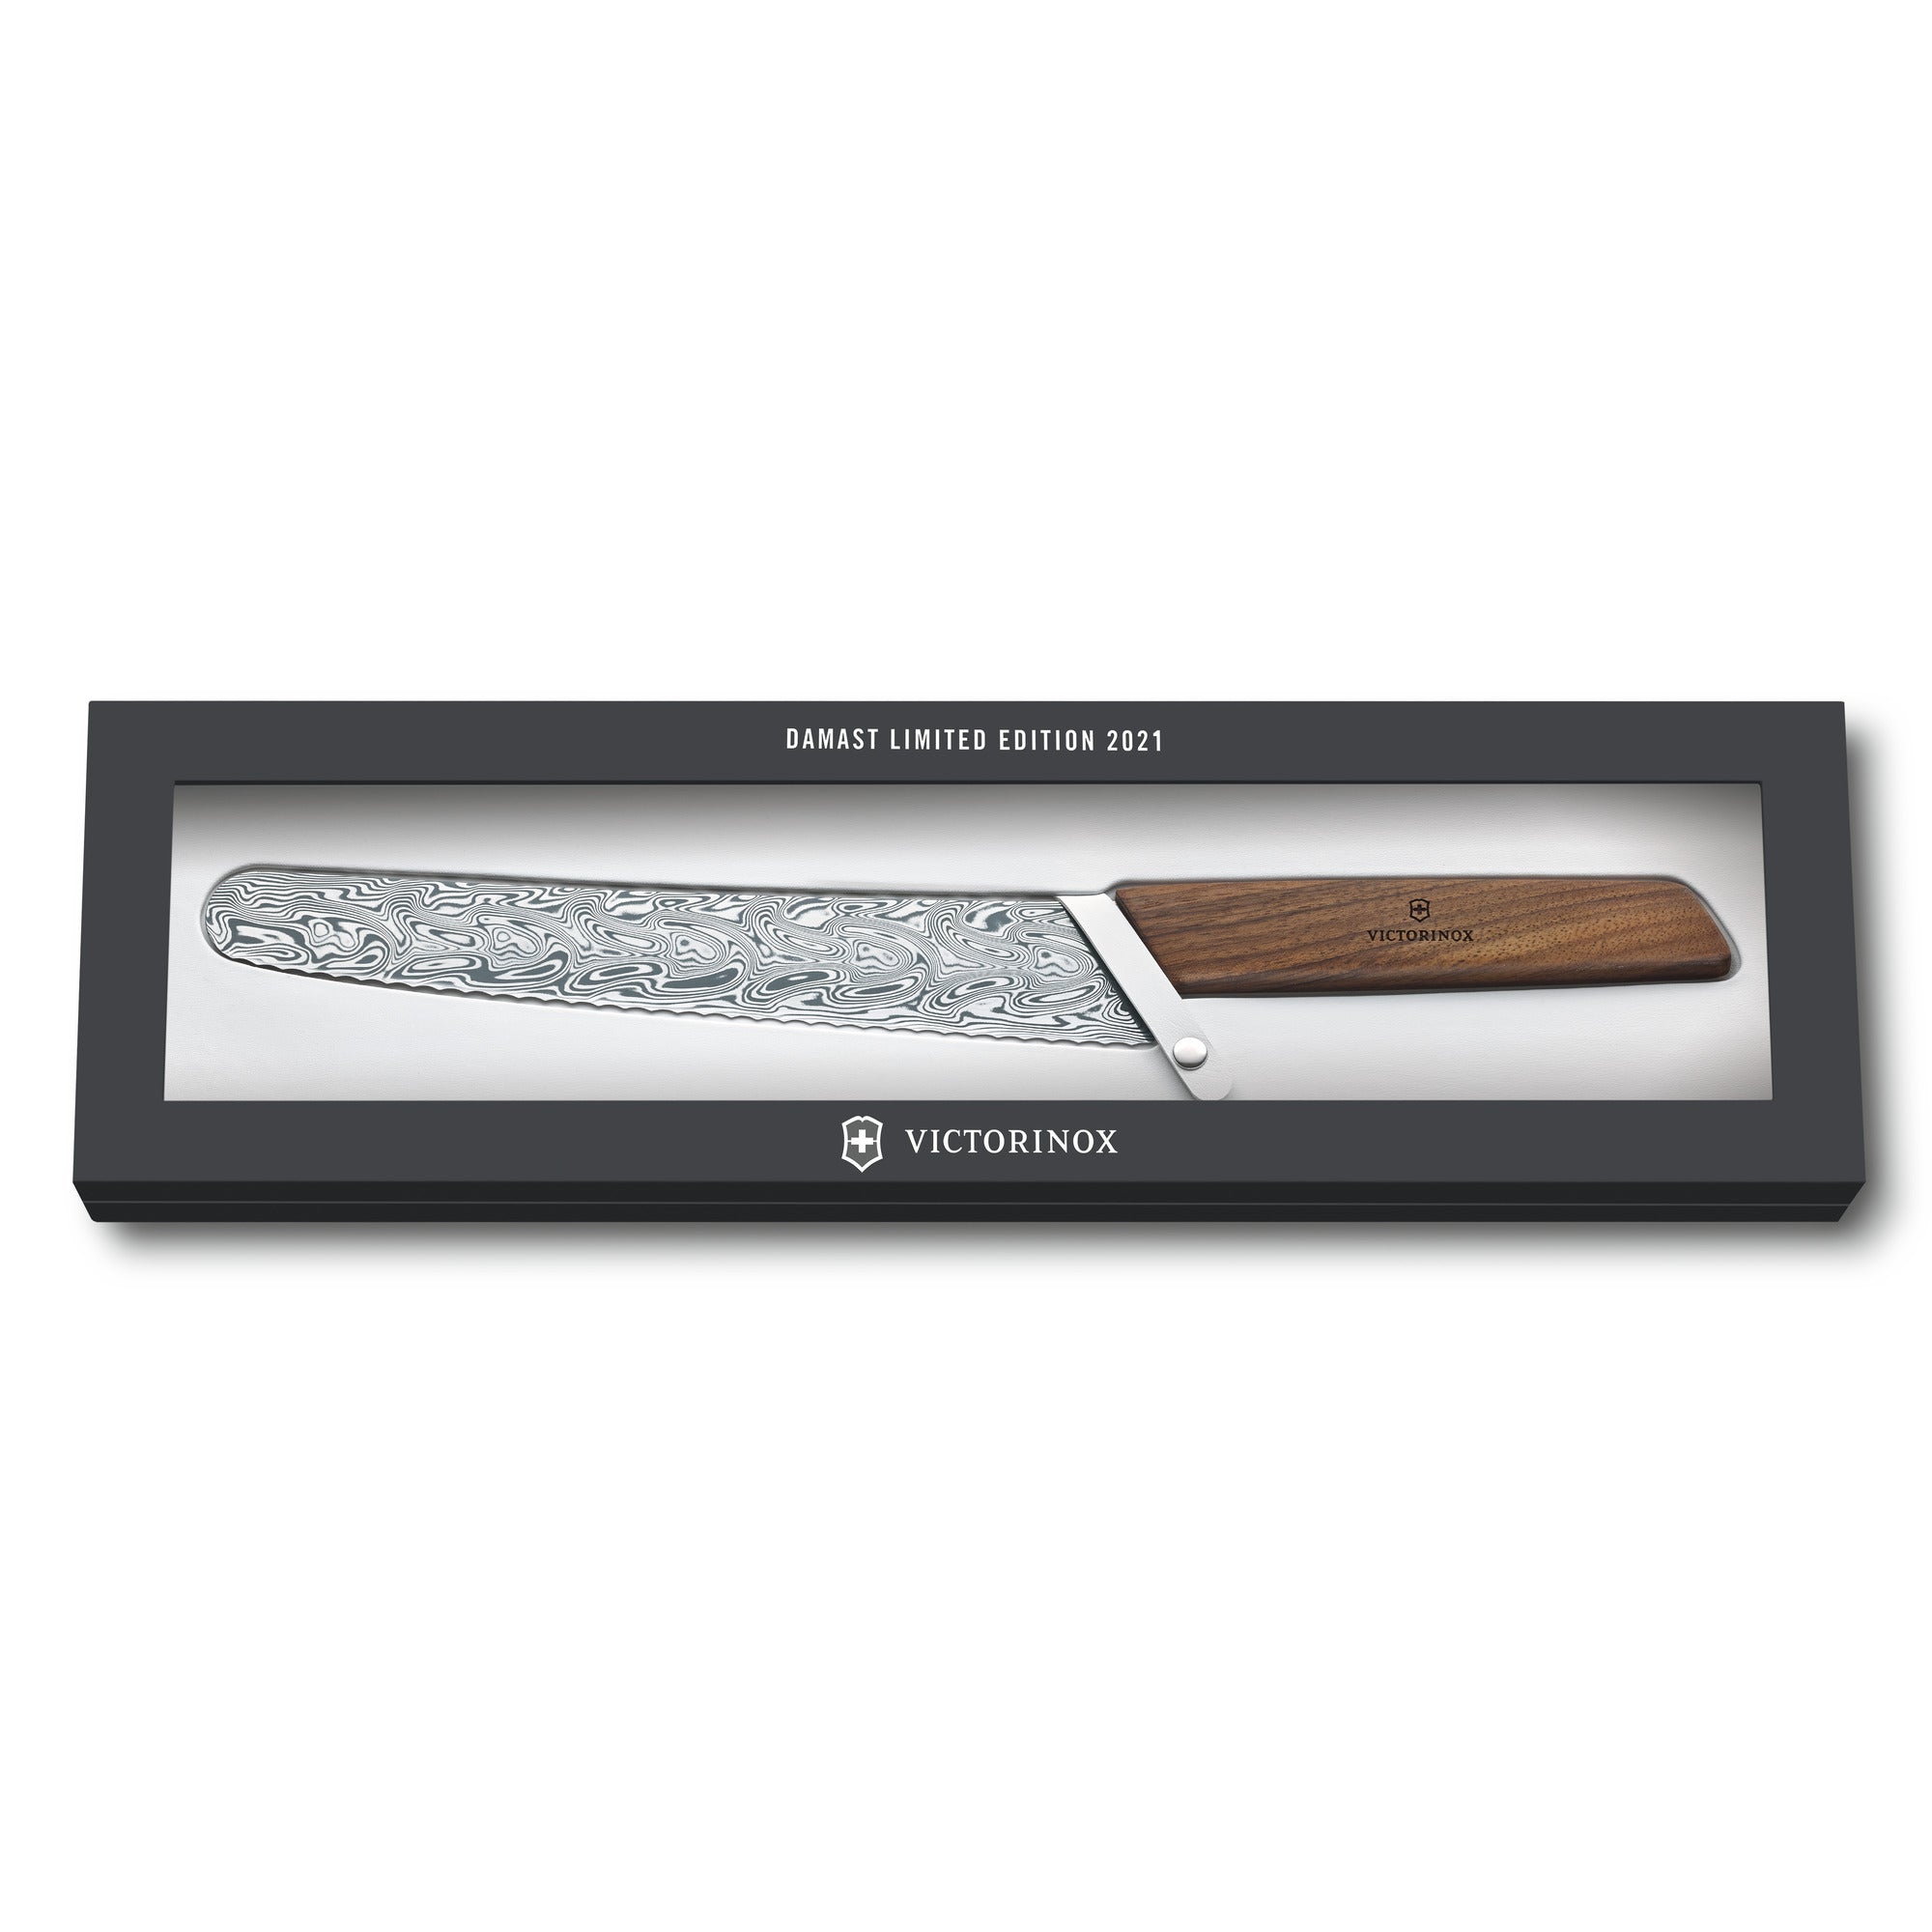 Victorinox Swiss Modern Bread and Pastry Damast Limited Edition